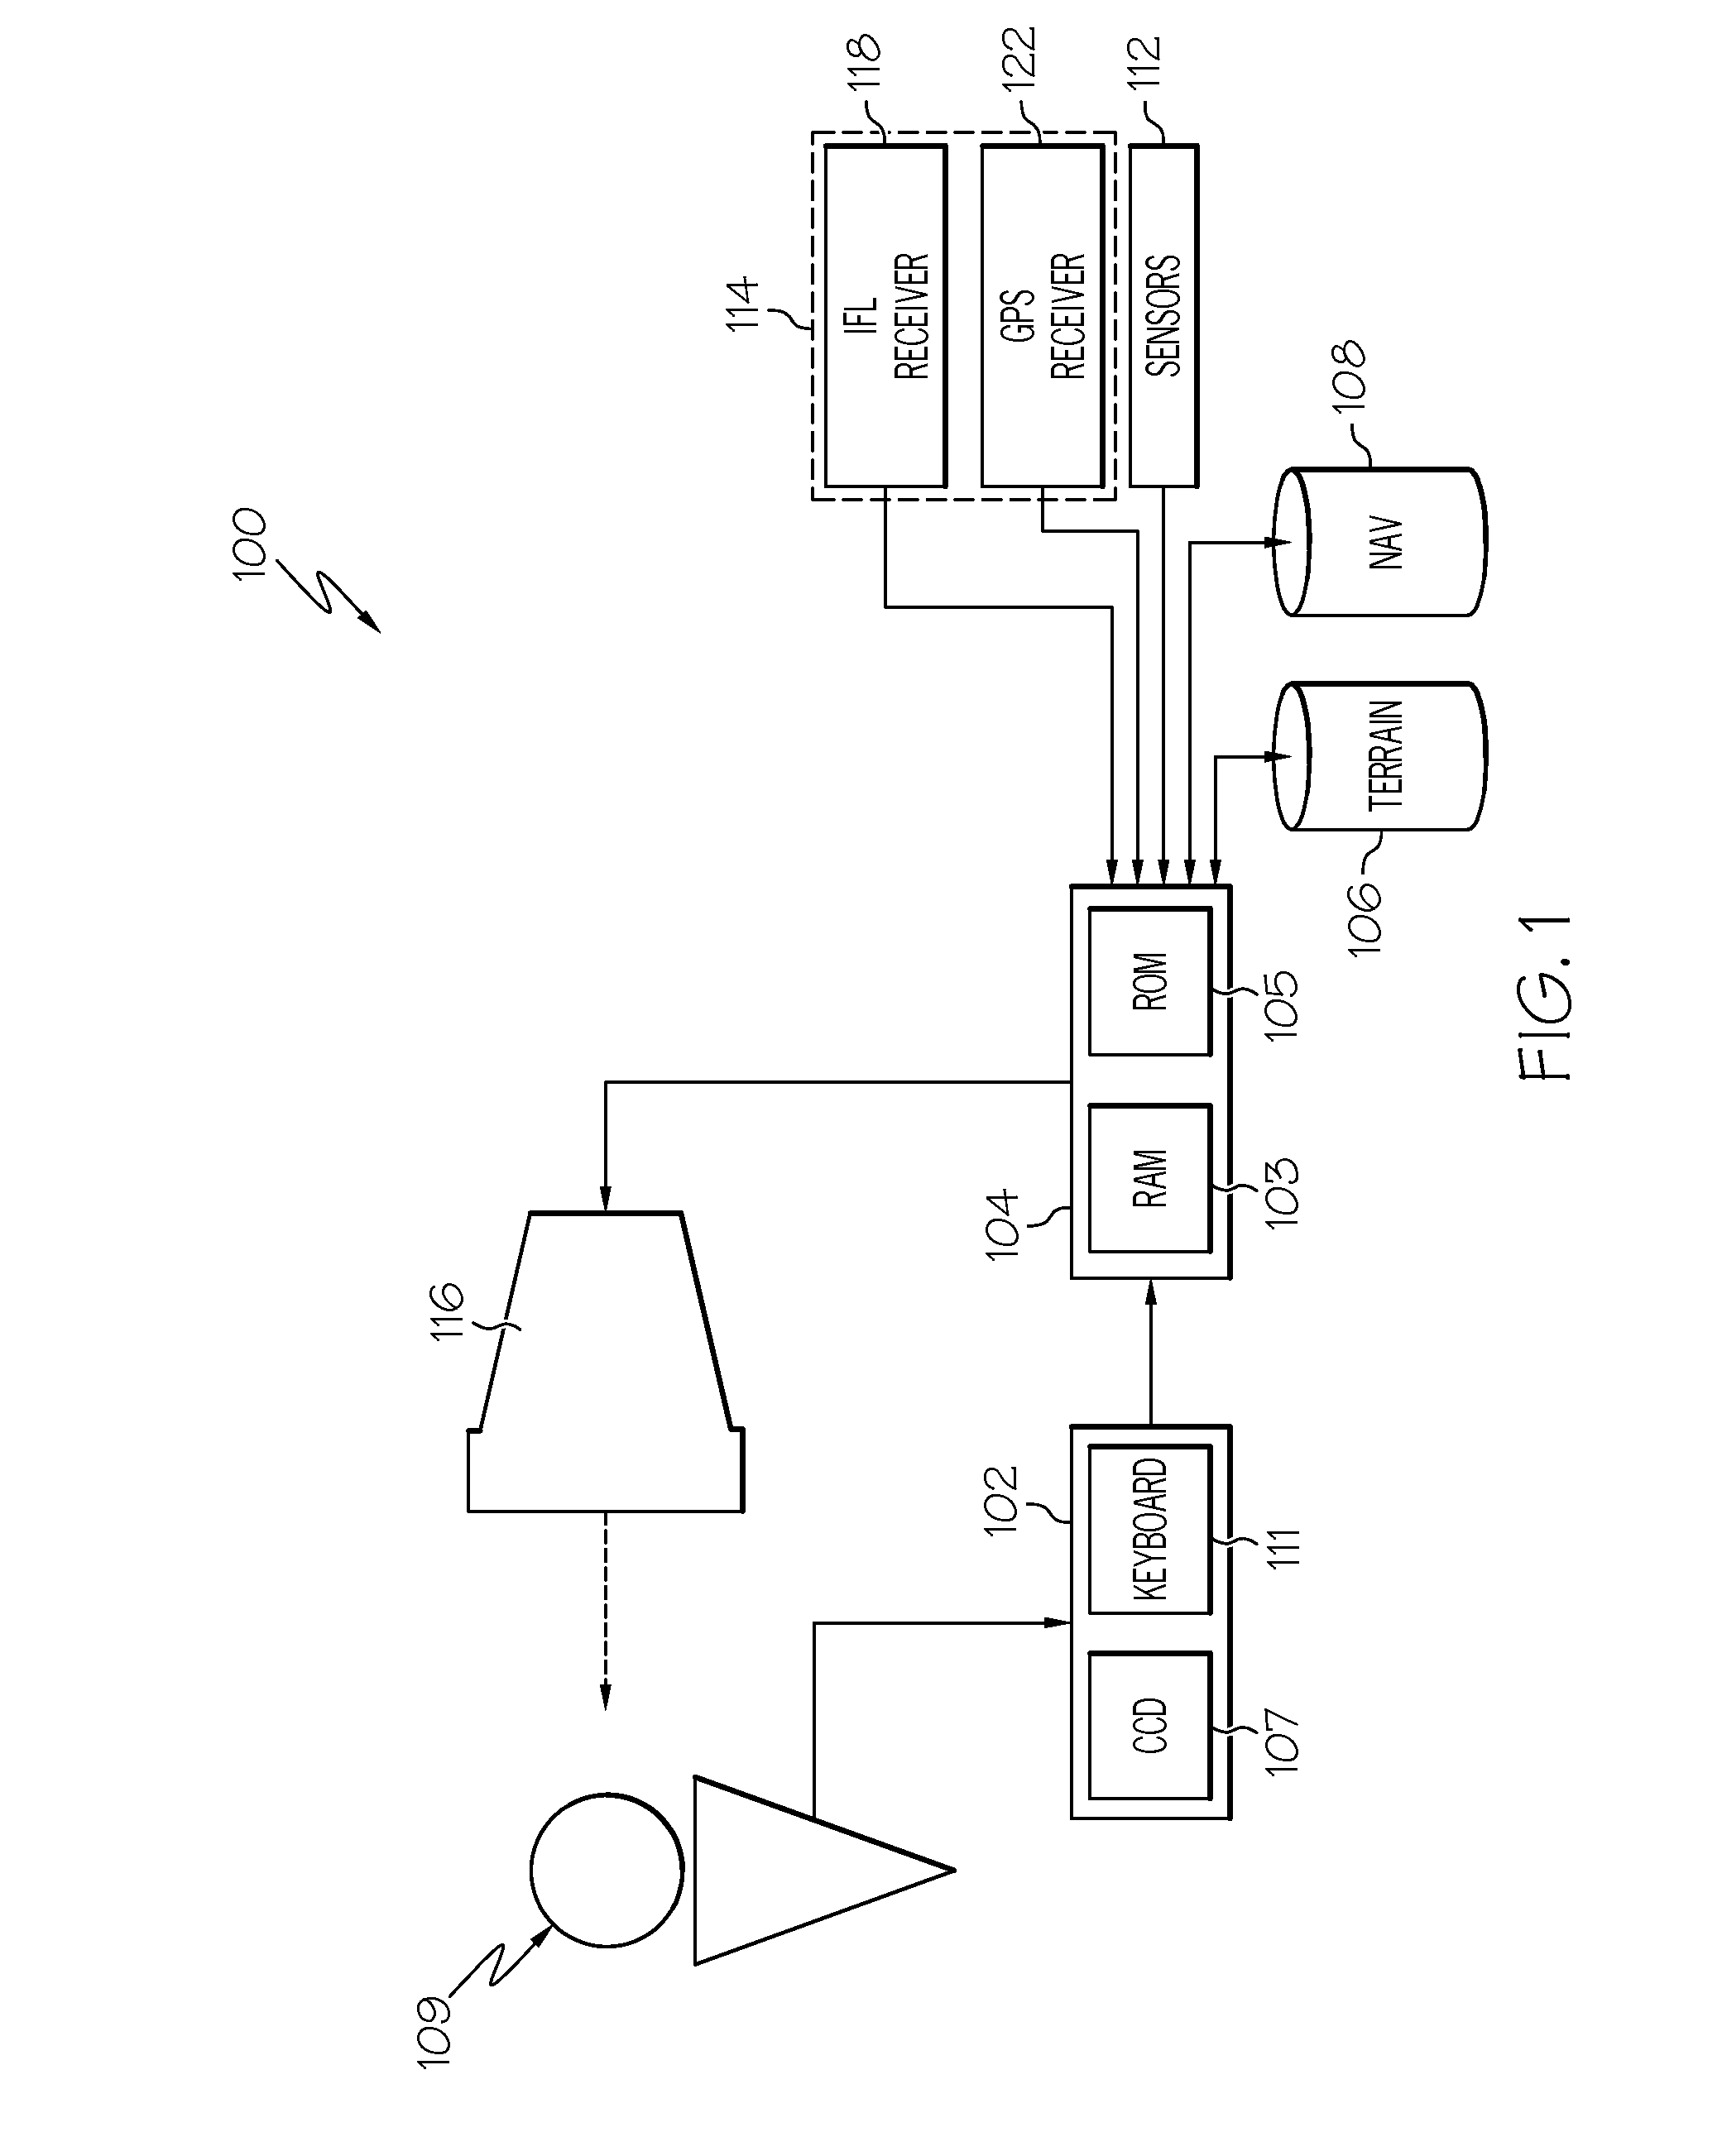 Aircraft system and method for selecting aircraft gliding airspeed during loss of engine power